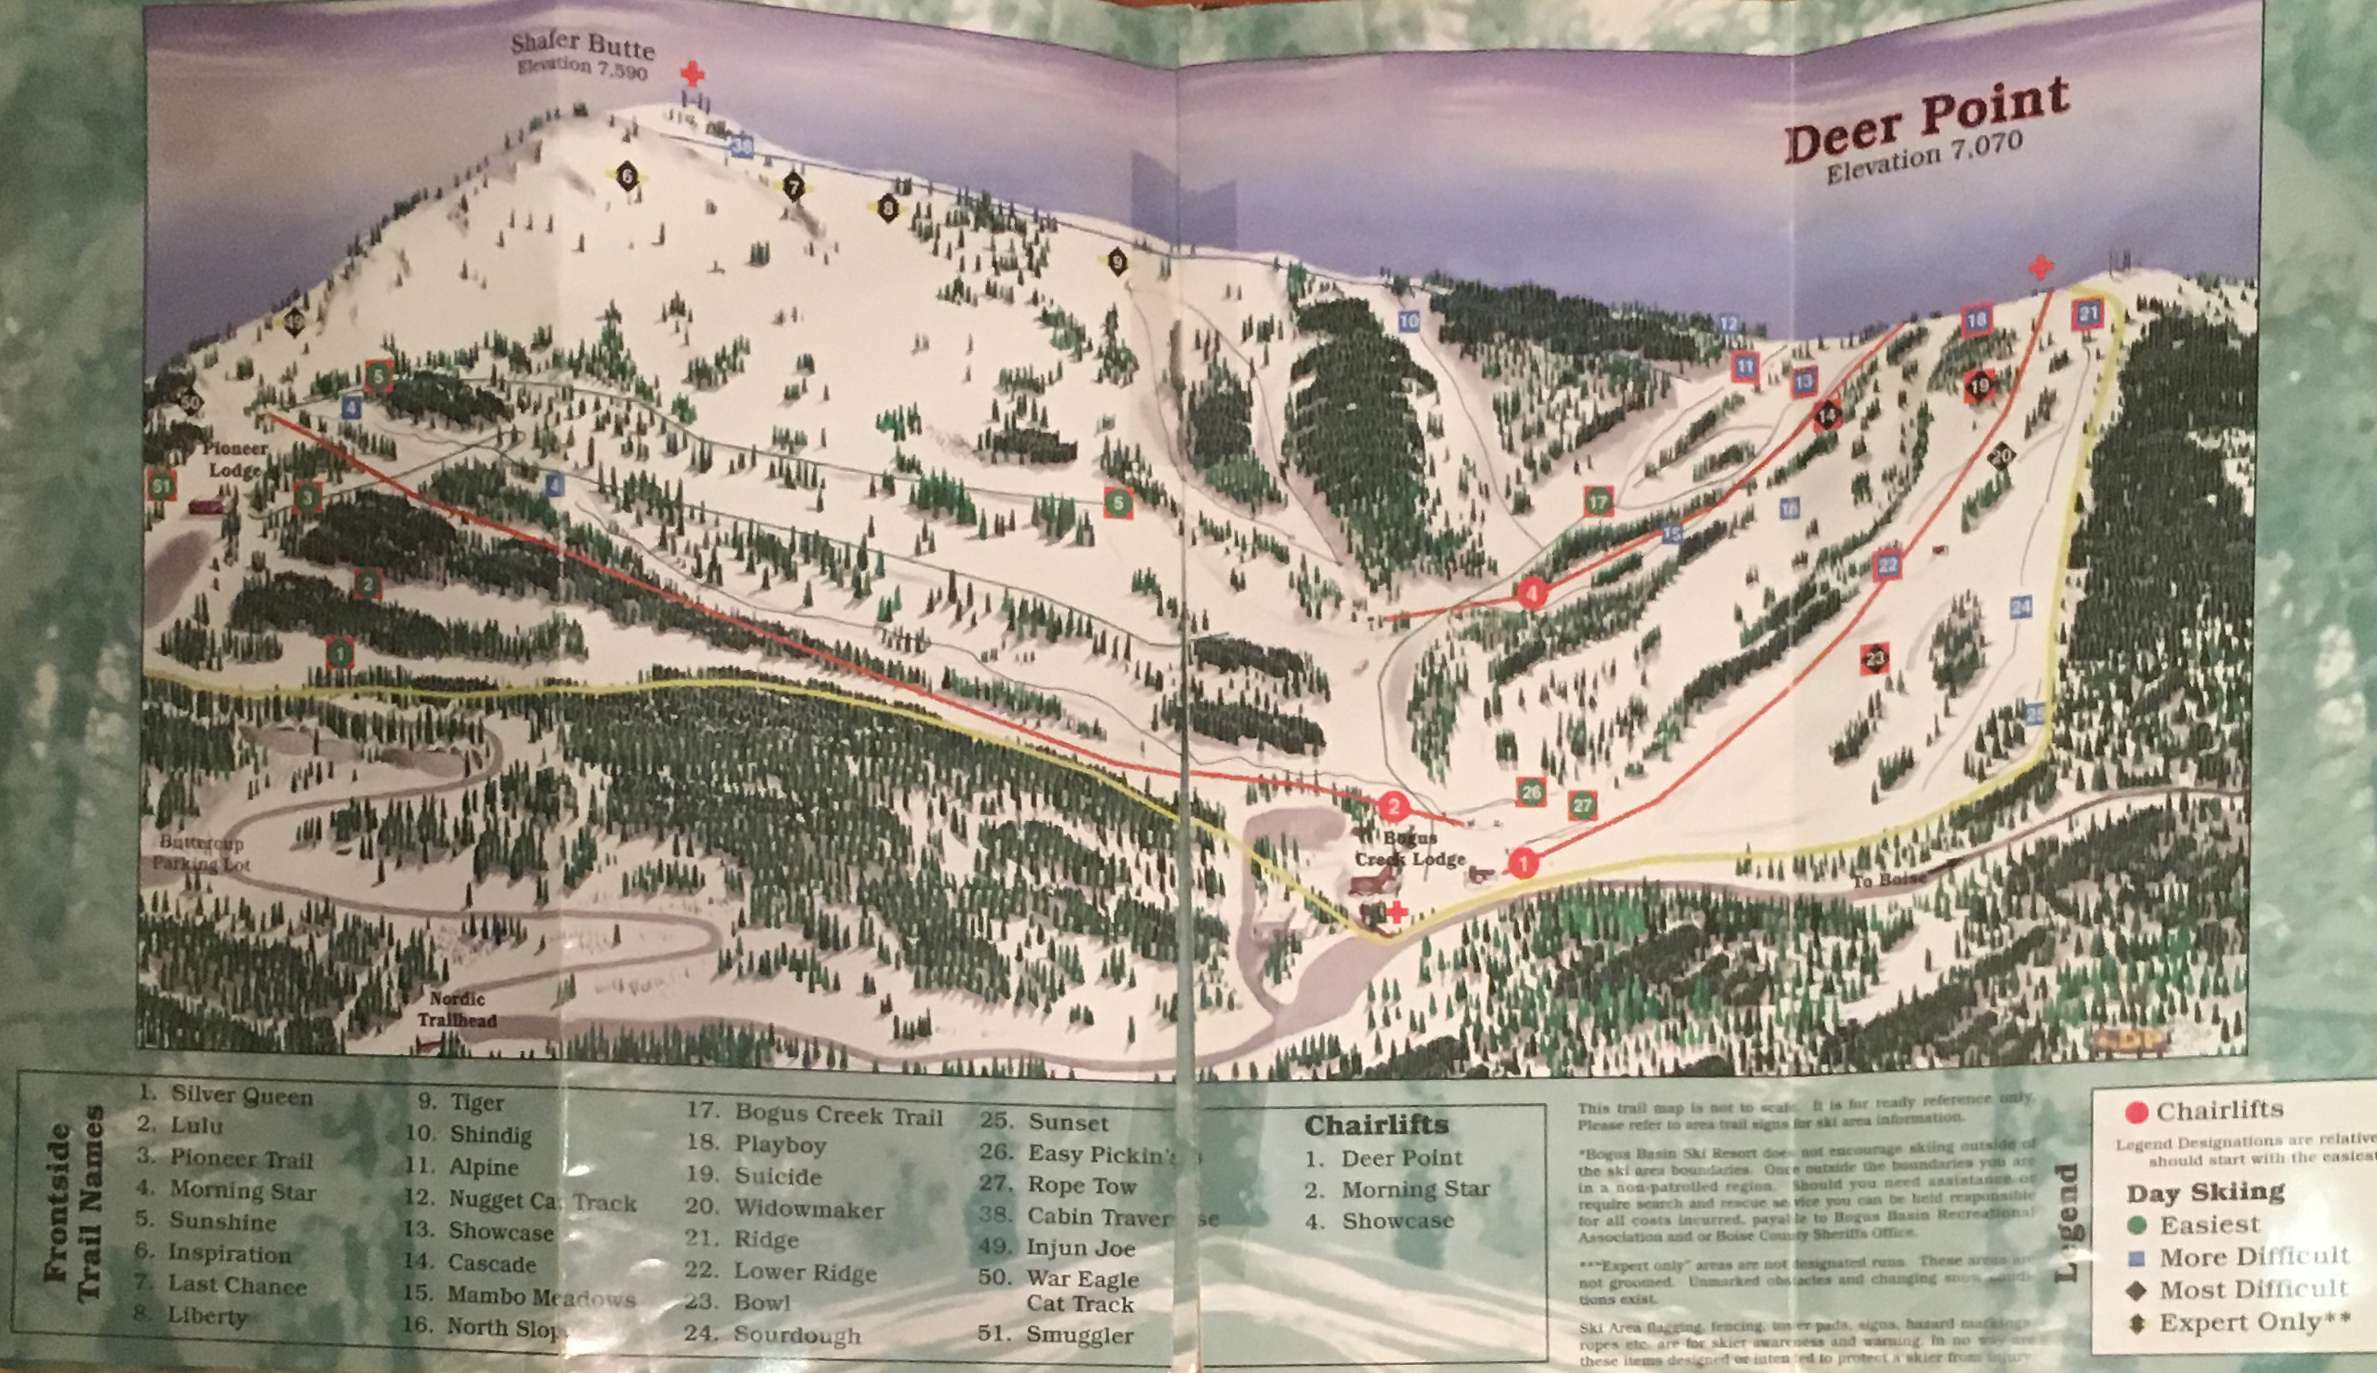 Not sure who the artist is, but the initials LDP are present in the bottom right corner of the Deer Point map.